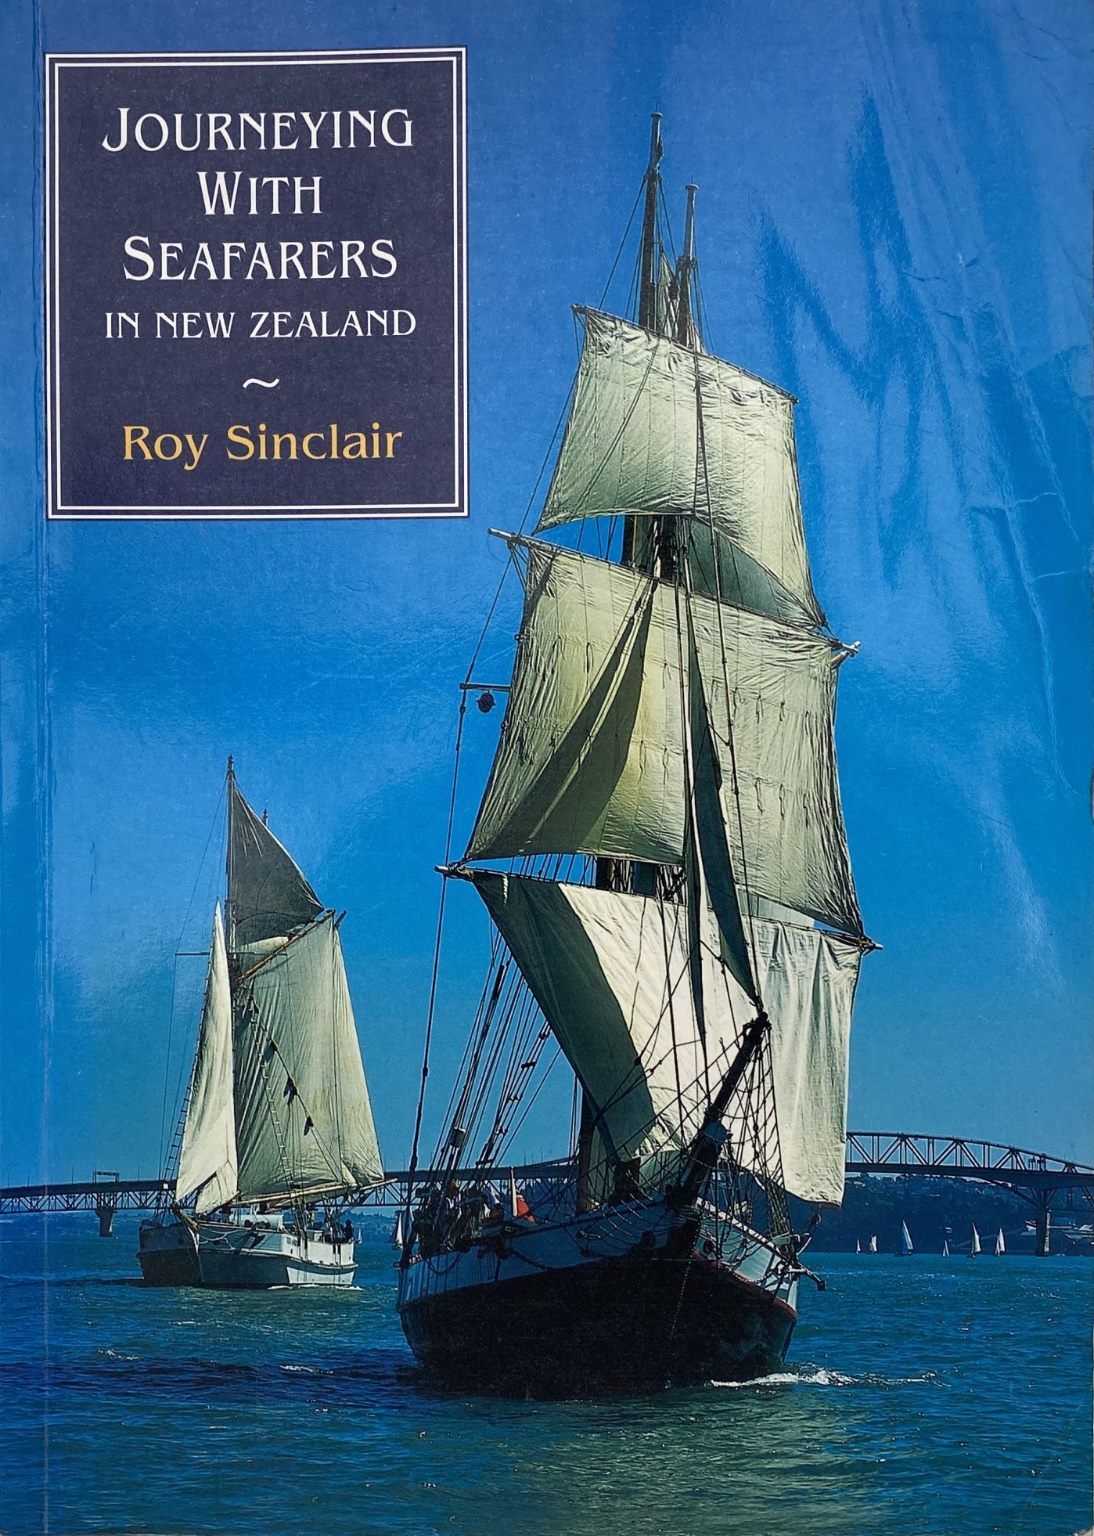 JOURNEYING WITH SEAFARERS in New Zealand